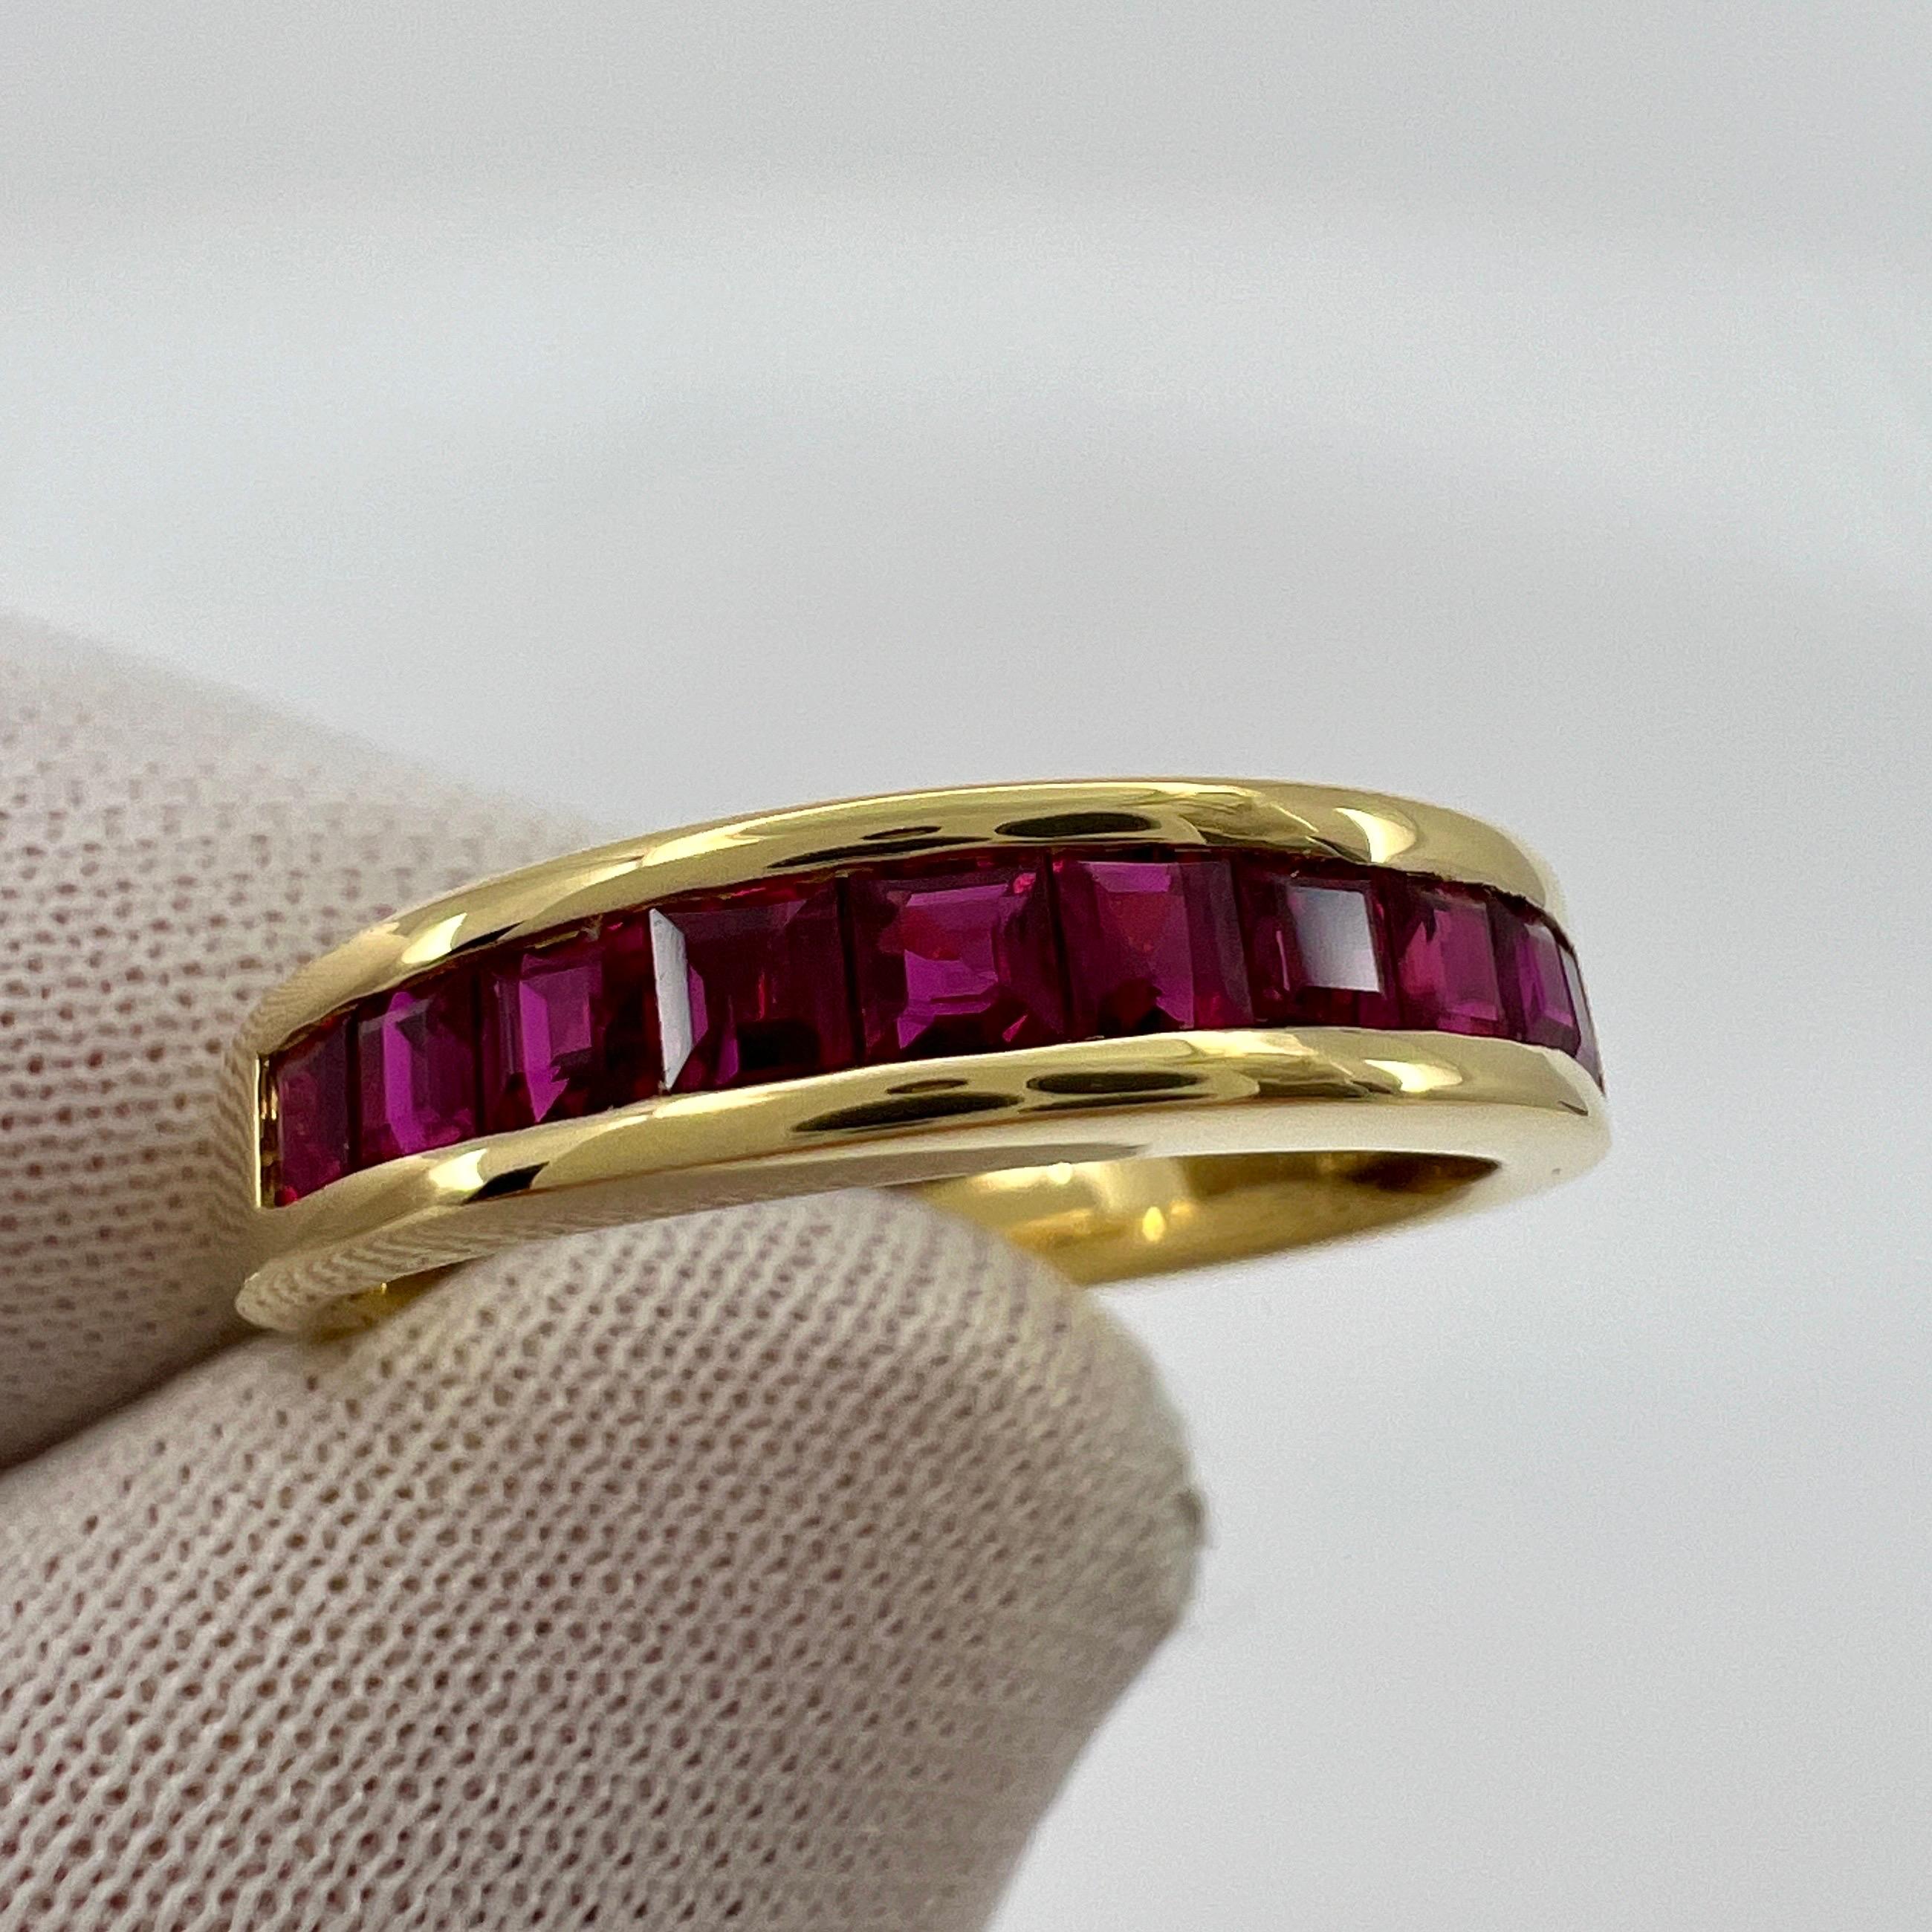 Vintage Tiffany & Co. 18k Yellow Gold Vivid Red Ruby Half Eternity Band Ring.

A beautifully made yellow gold half eternity ring set with stunning vivid red square princess cut rubies. Superb colour, clarity and cut. Perfectly matched. With a band